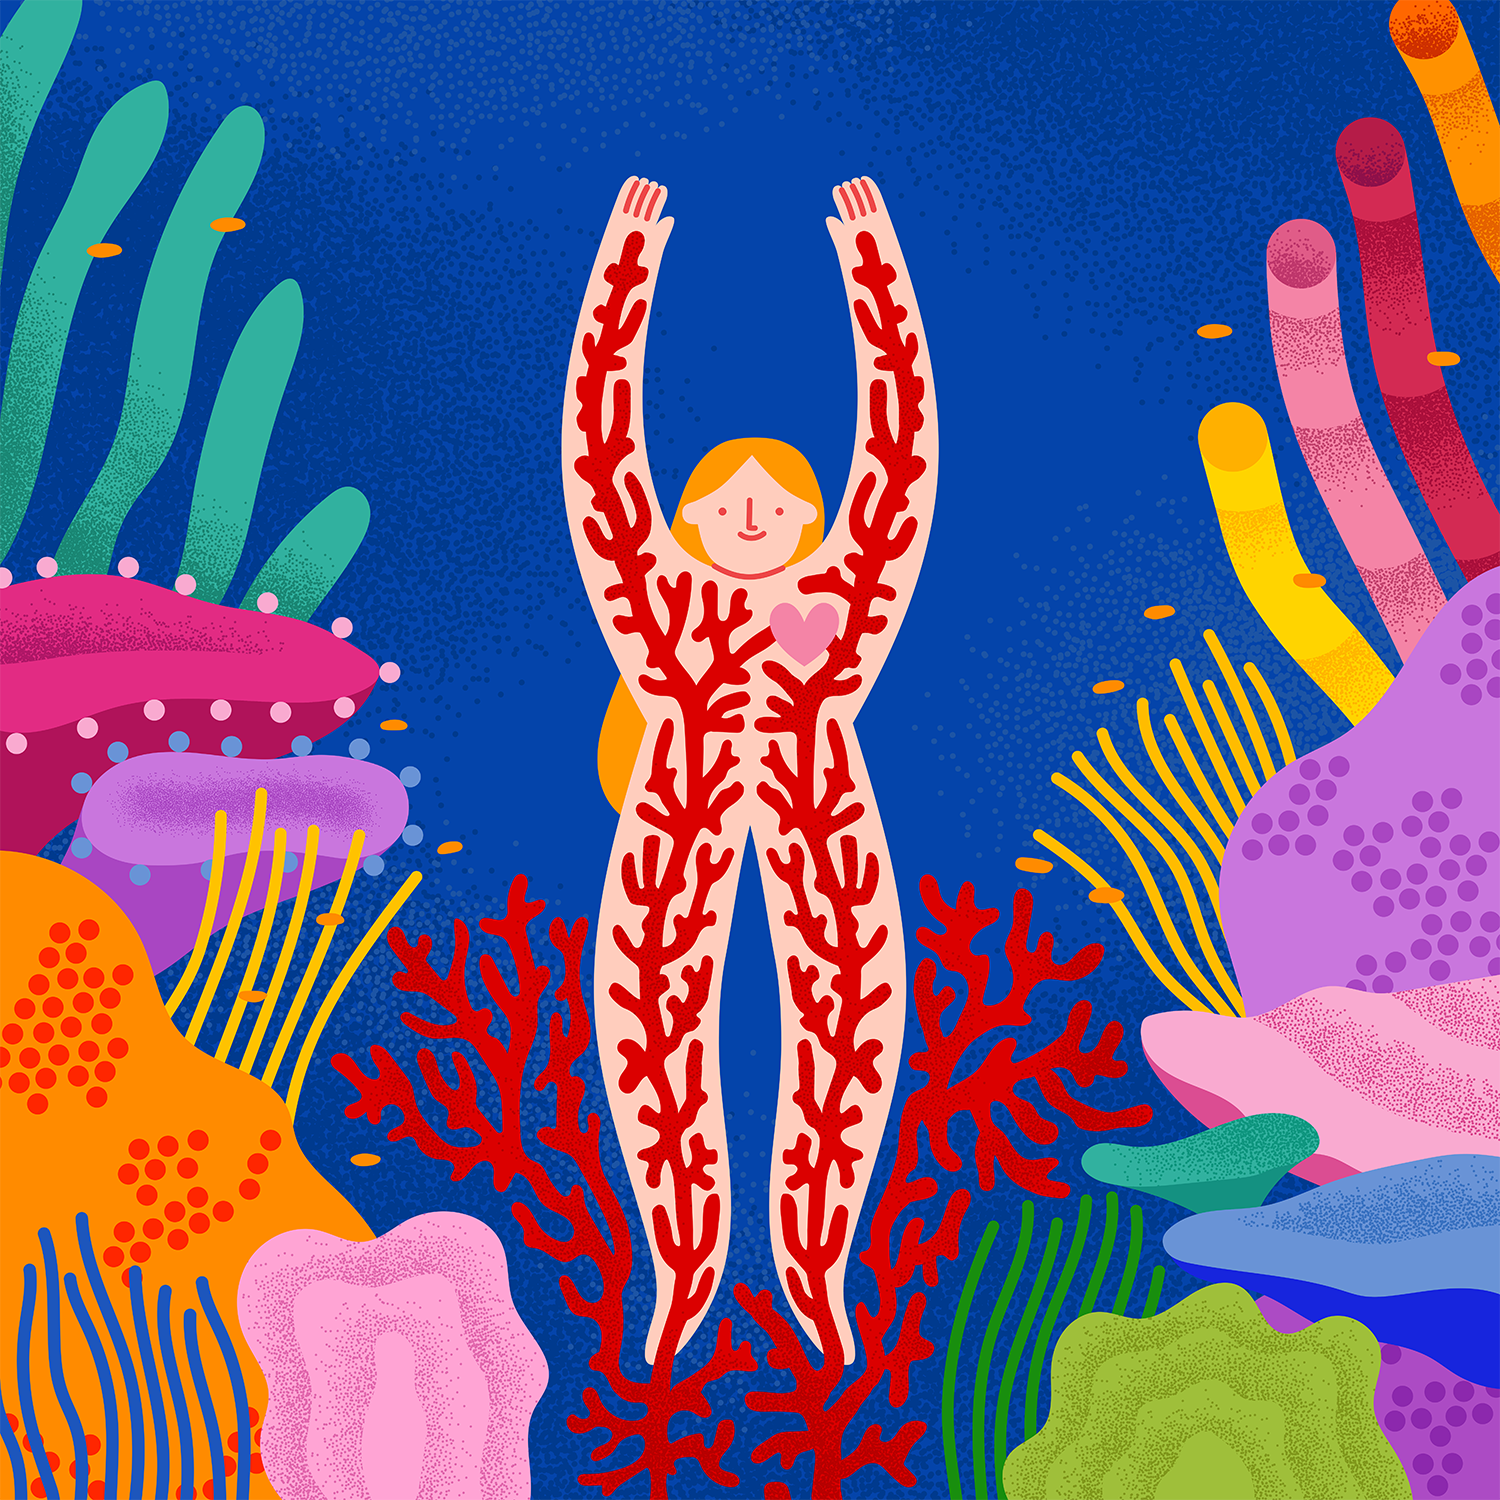 Illustration of a woman raising arms in coral environment, corals form veins in her body